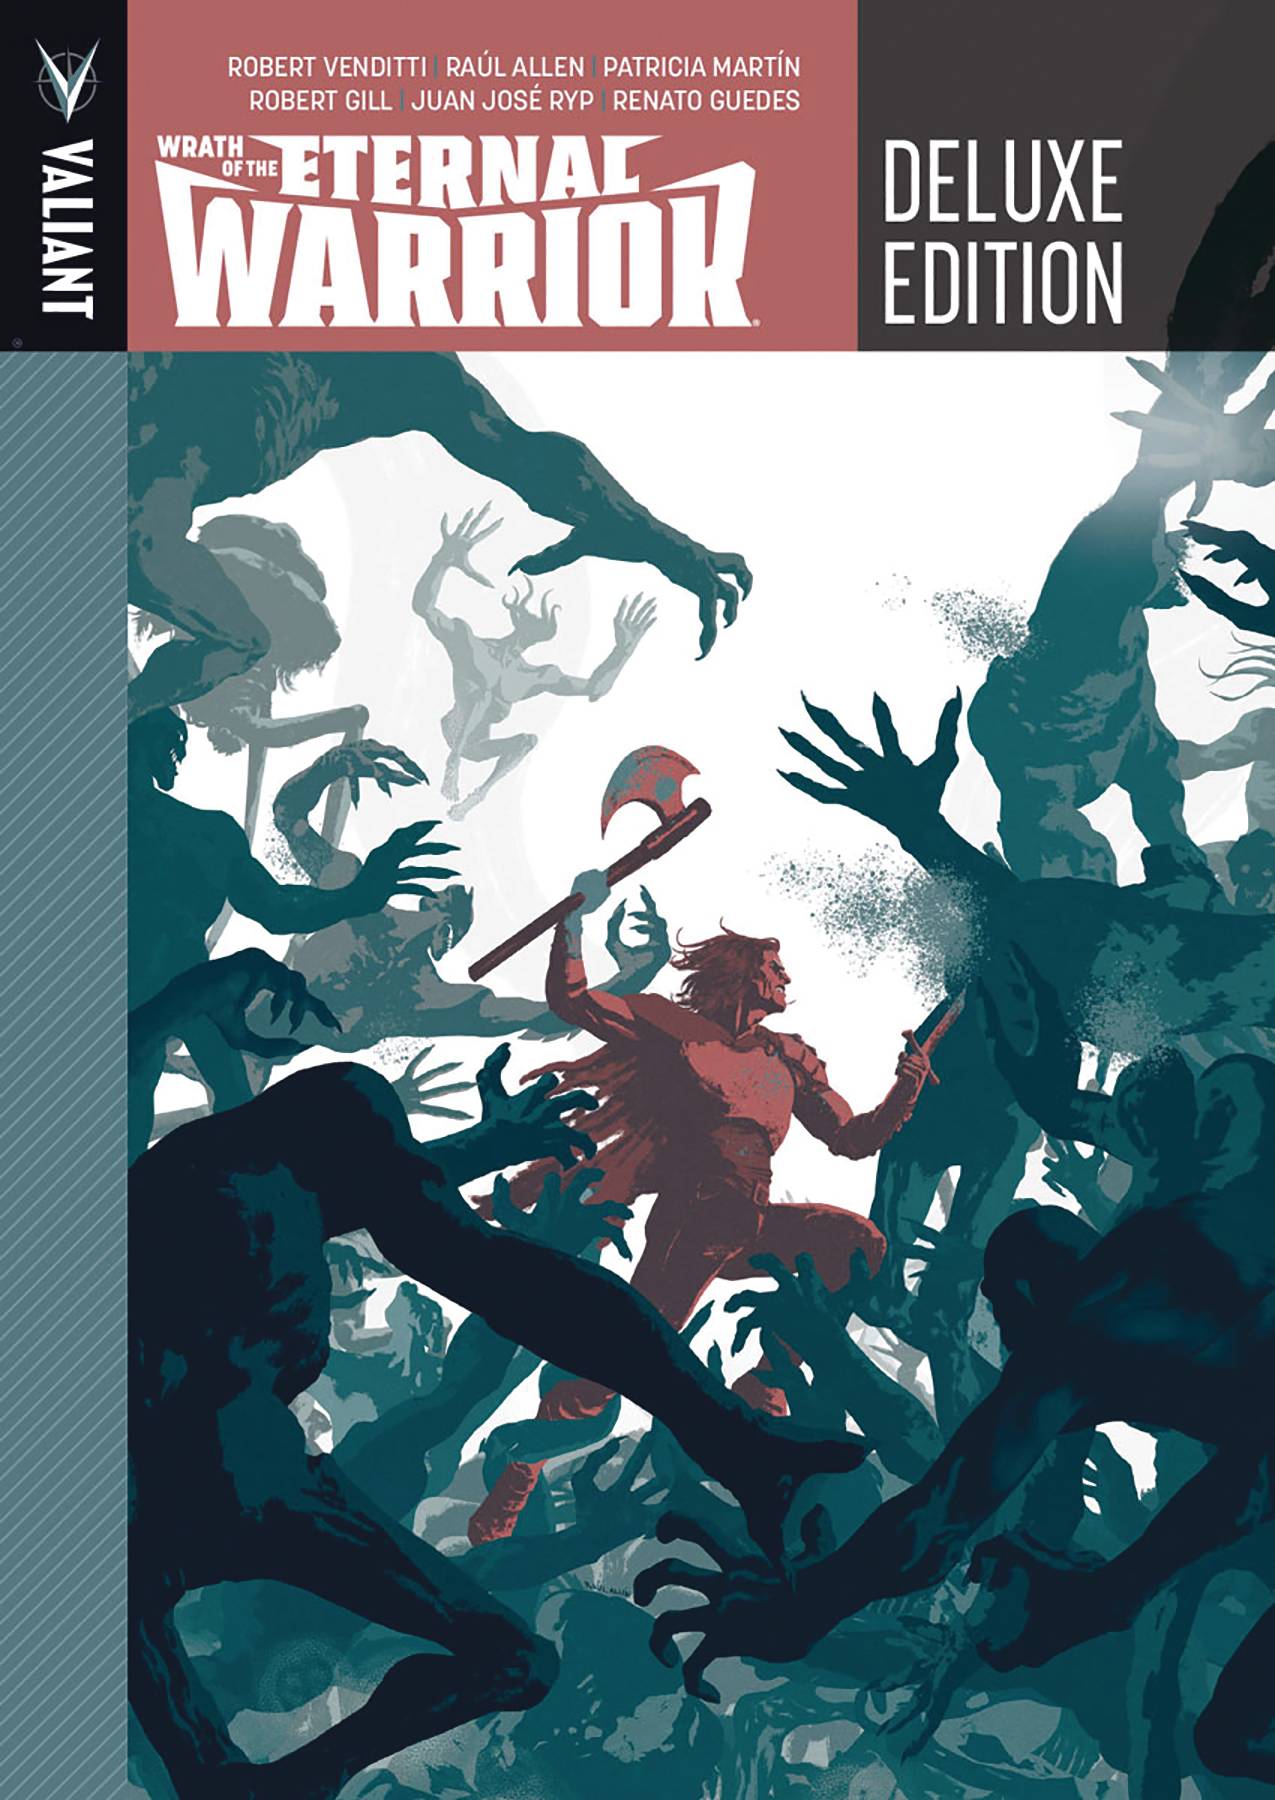 Wrath of the Eternal Warrior Hardcover Deluxe Edition